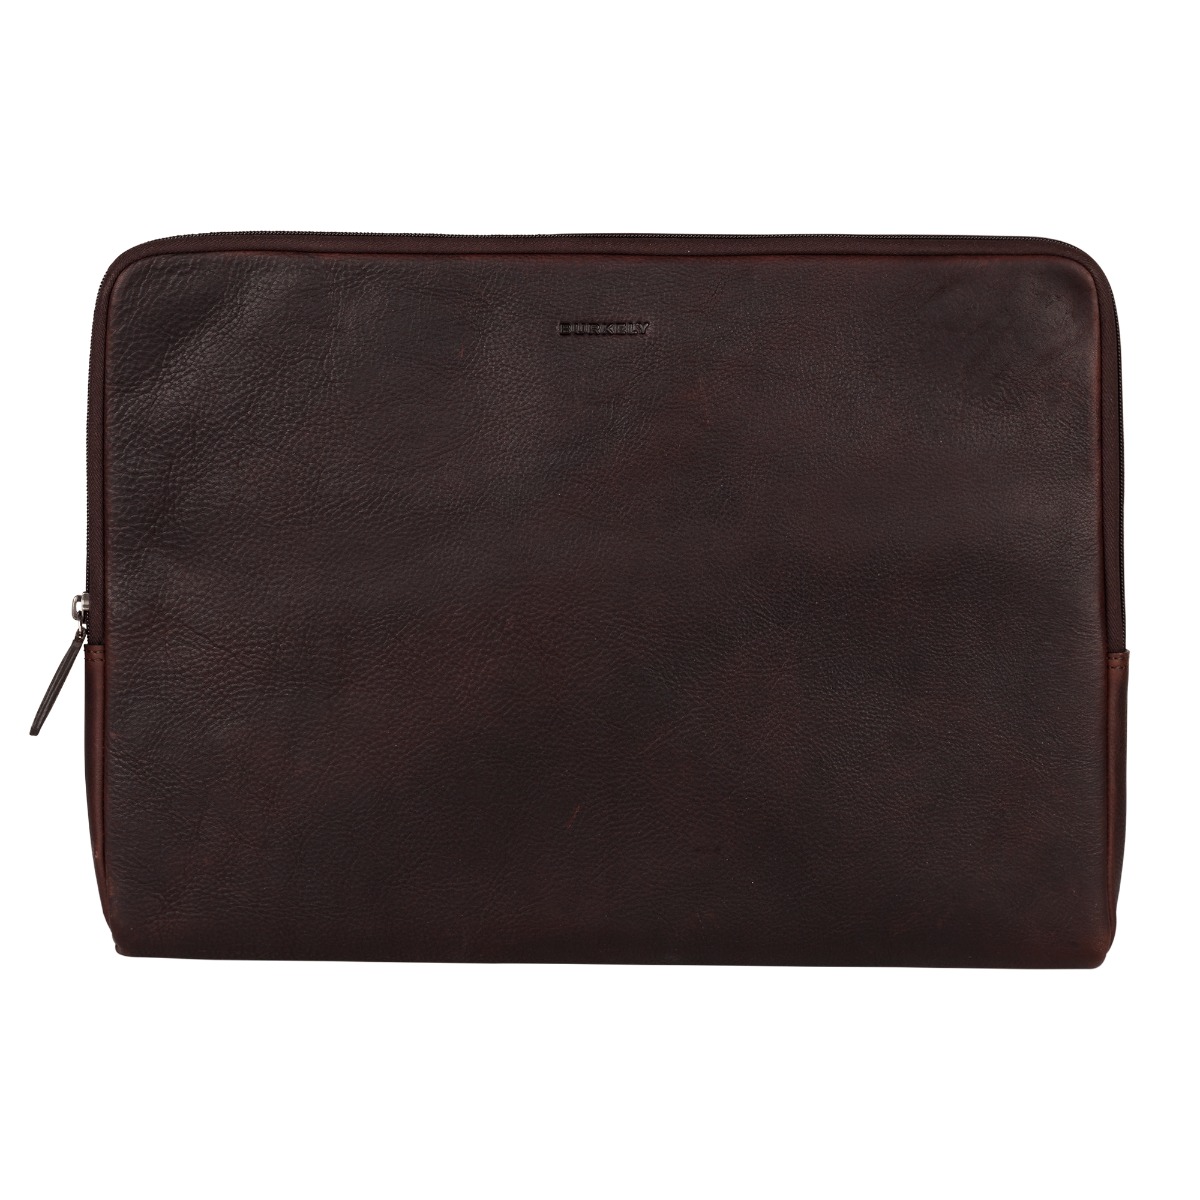 Burkely Antique Avery Laptopsleeve 15.6 Brown